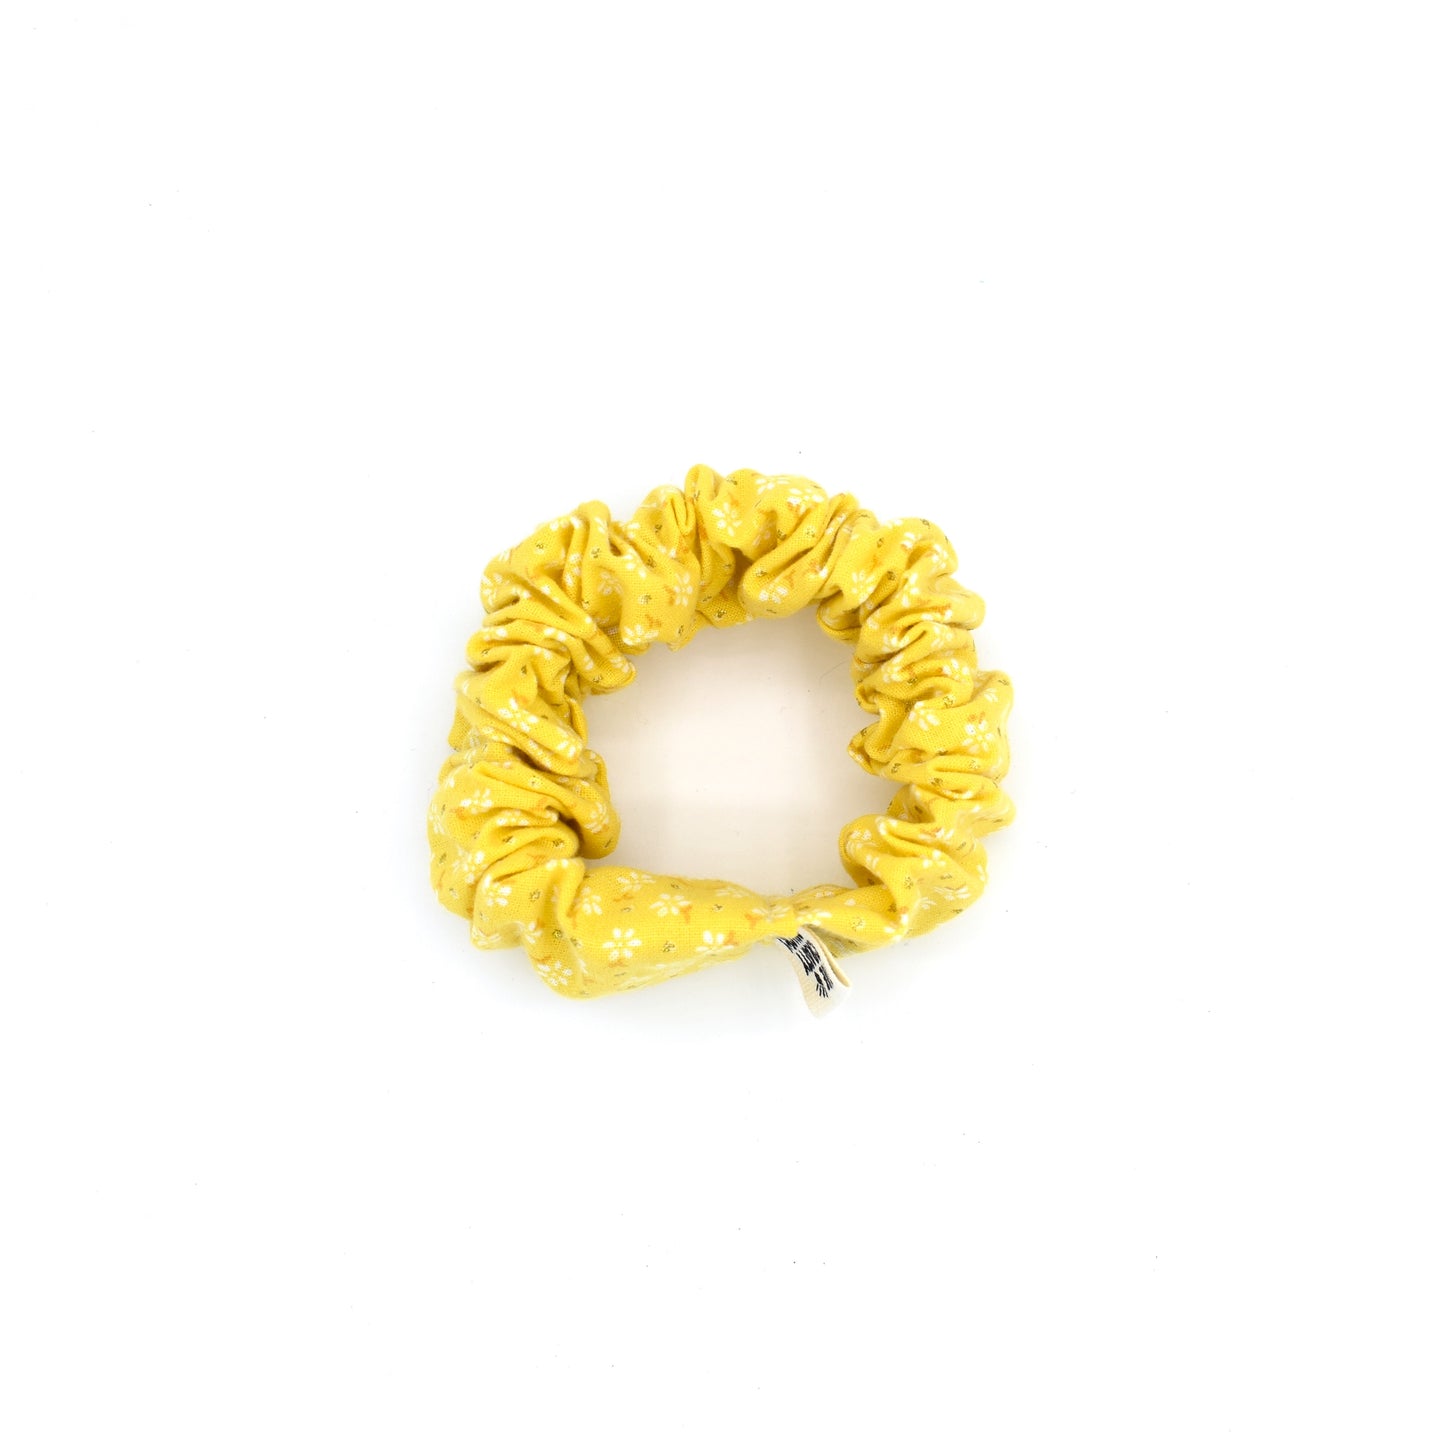 Yellow Glitter Flower Scrunchie with The Crafty Chicky tag